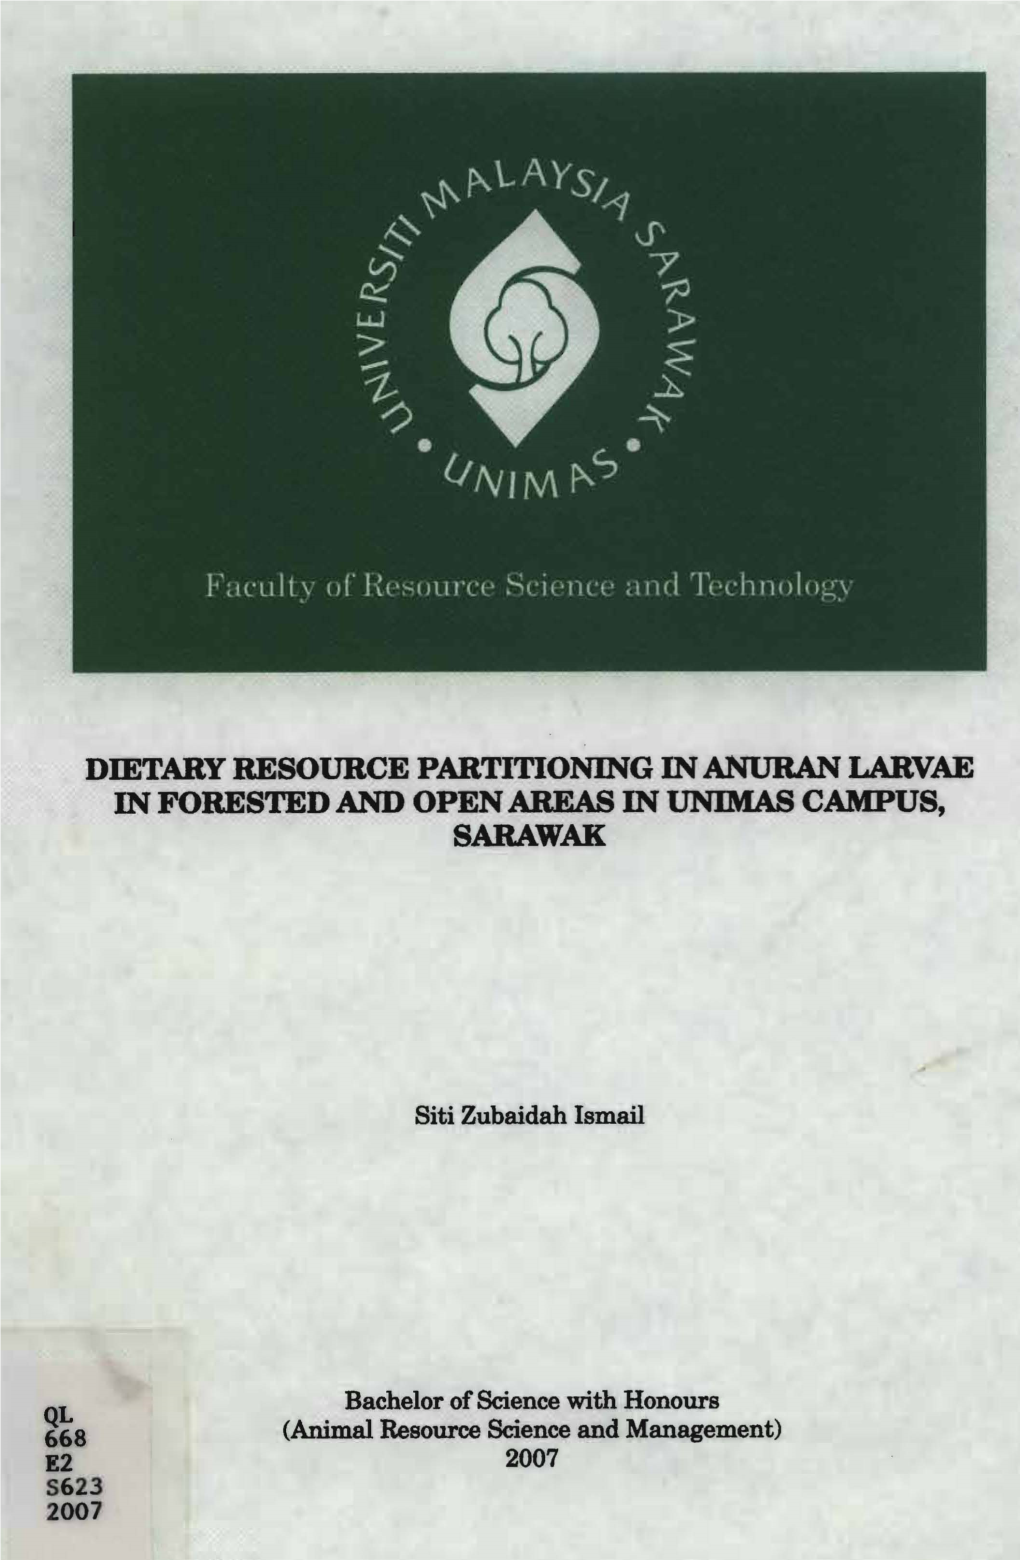 Dietary Resource Partitioning in Anuran Larvae in Forested and Openareas in Unimas Campus, Sarawak